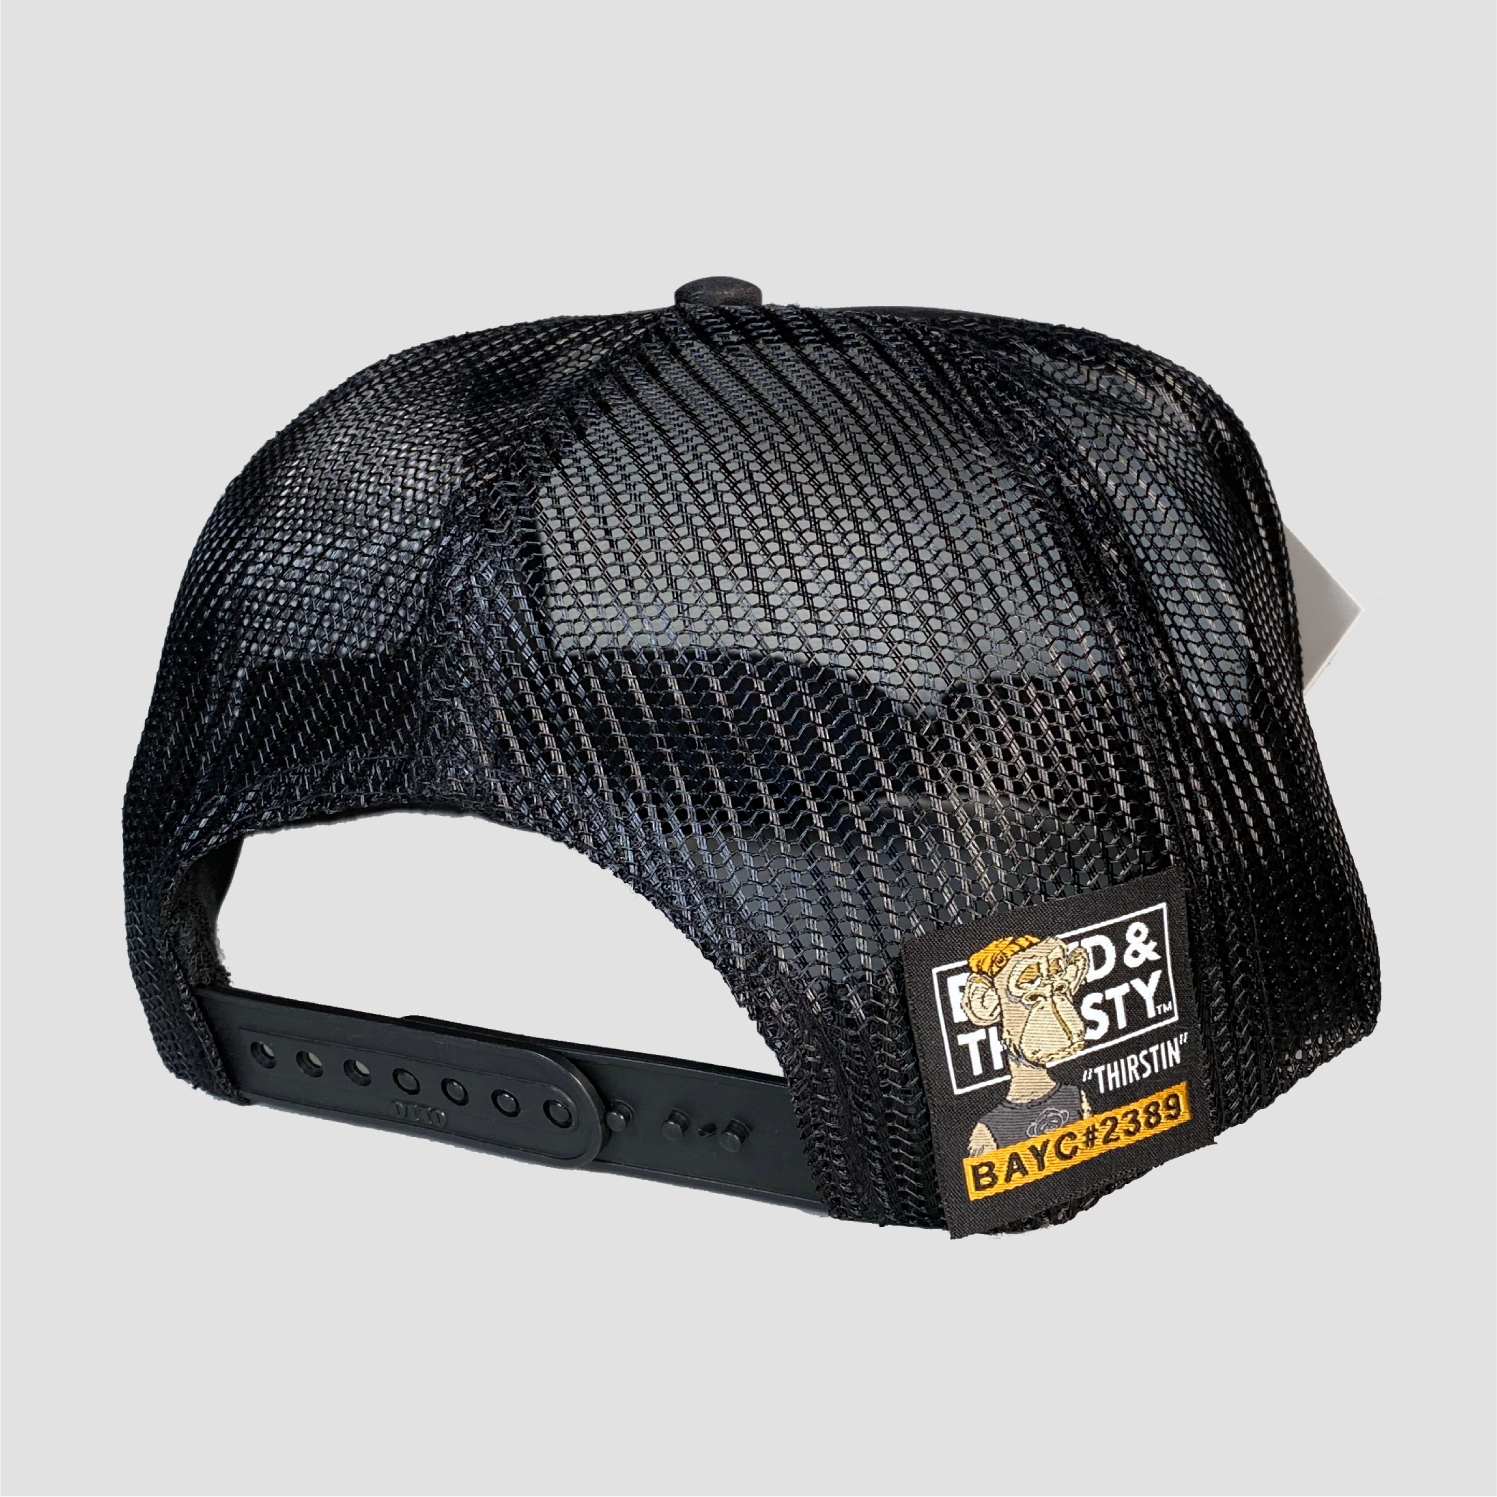 No detail or expense spared with our classic black trucker cap. Check out the sewn on label.